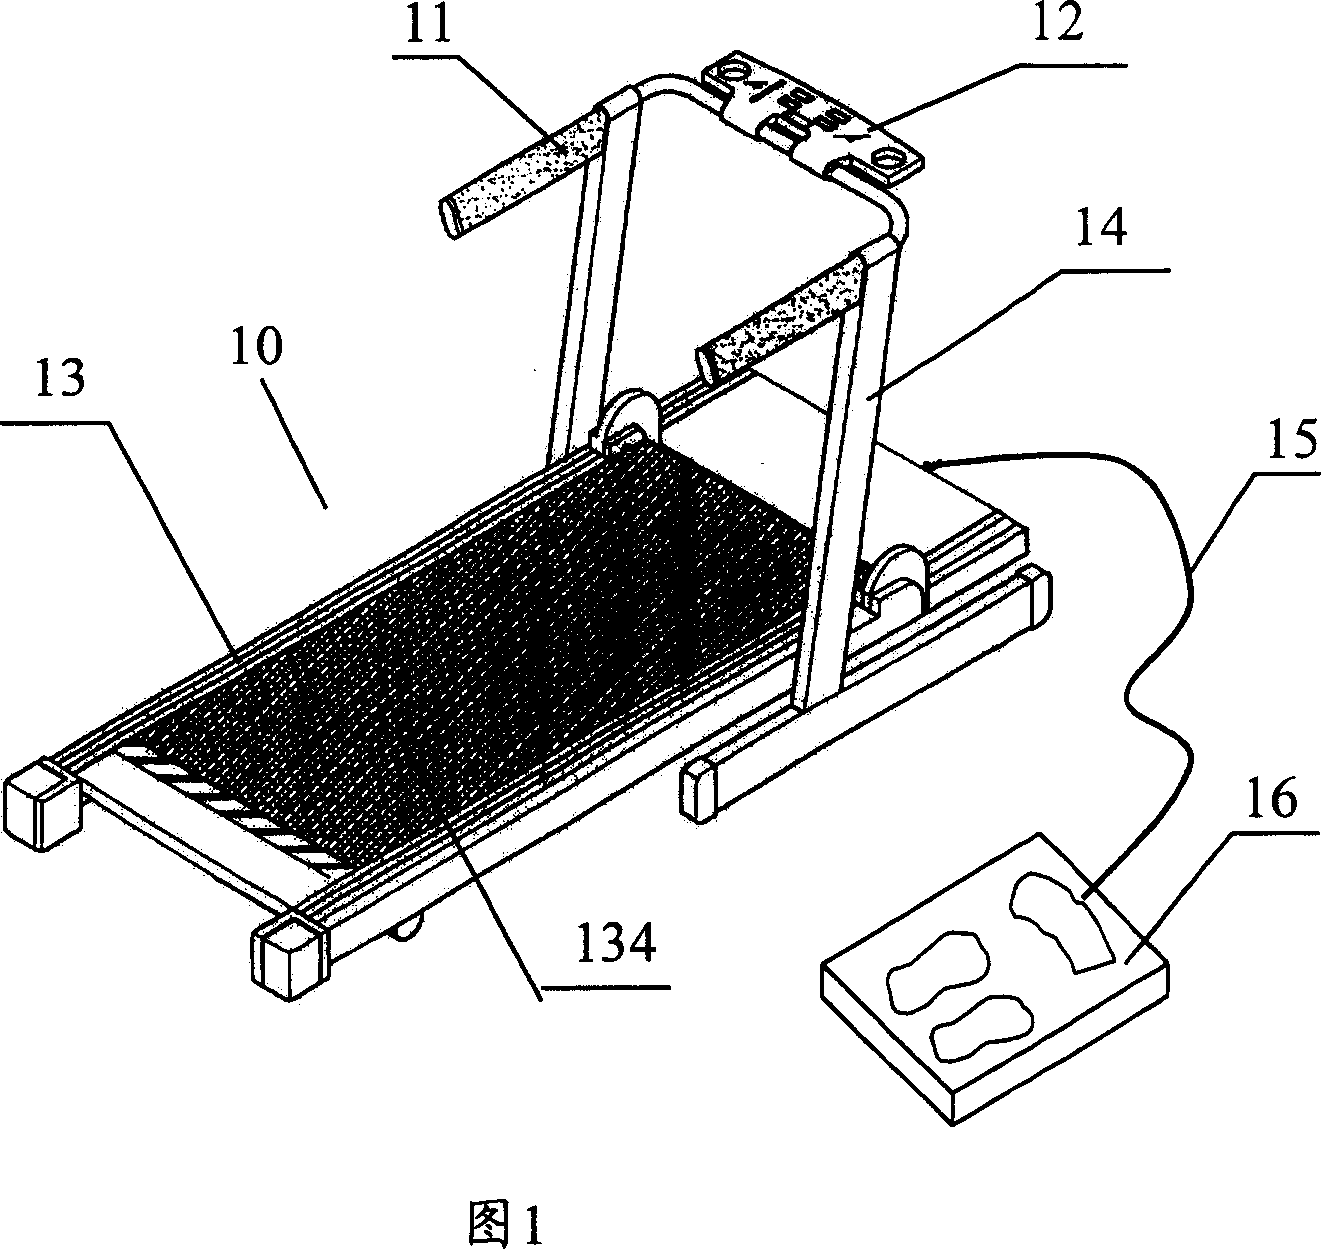 Realizing method of intelligent motion or therapeutic apparatus